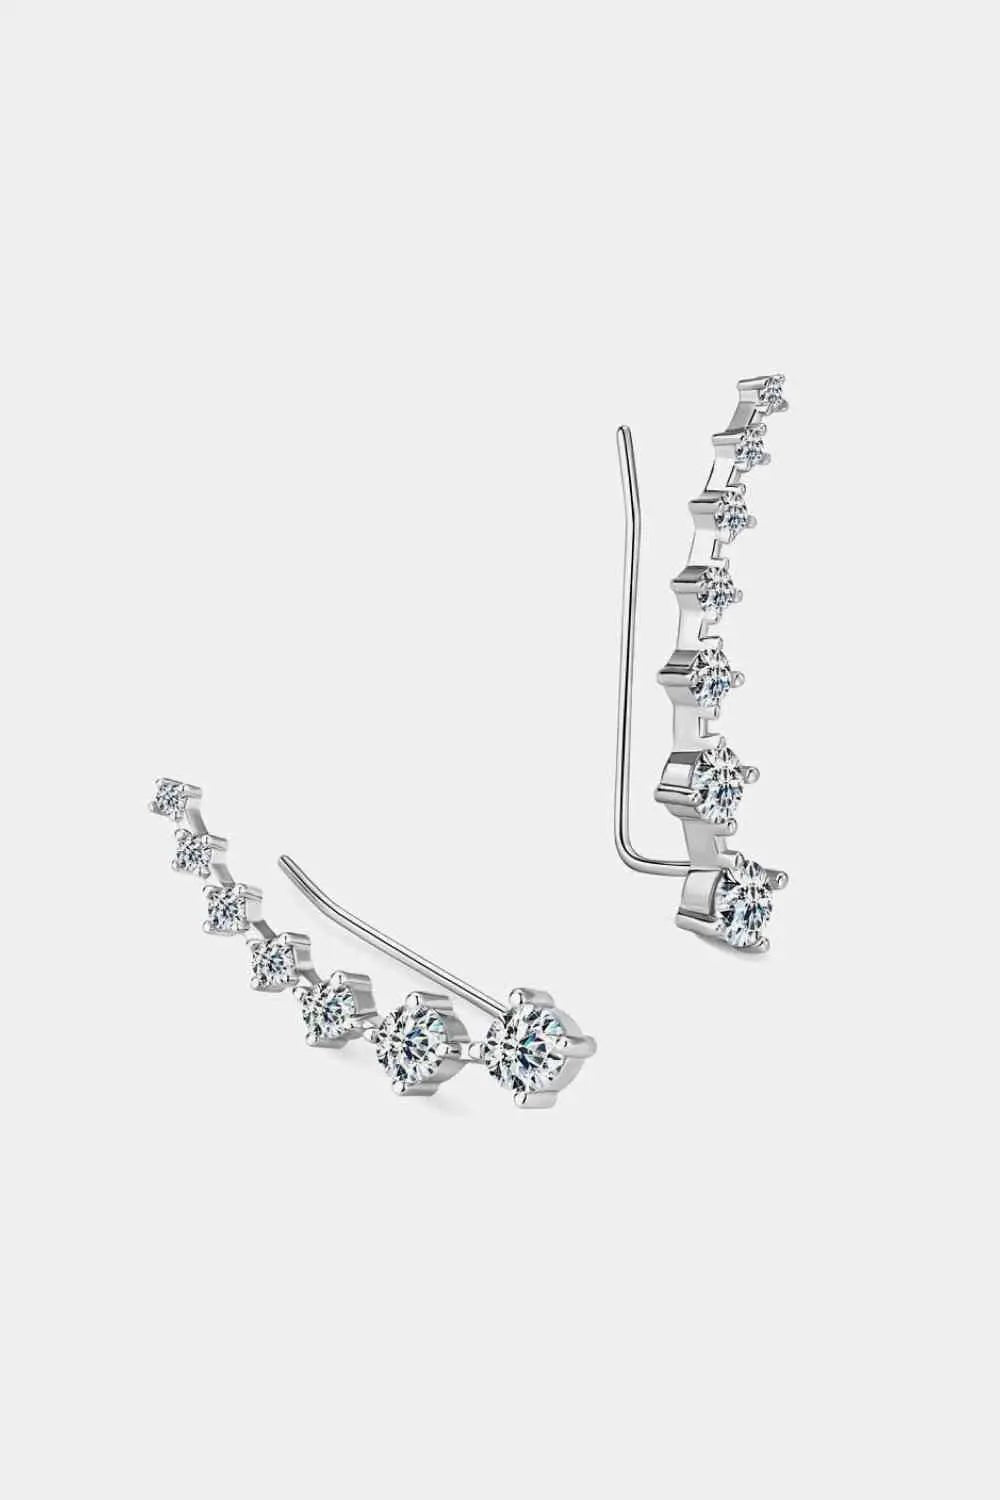 1.9 Carat Moissanite 925 Sterling Silver Earrings - GemThreads Boutique